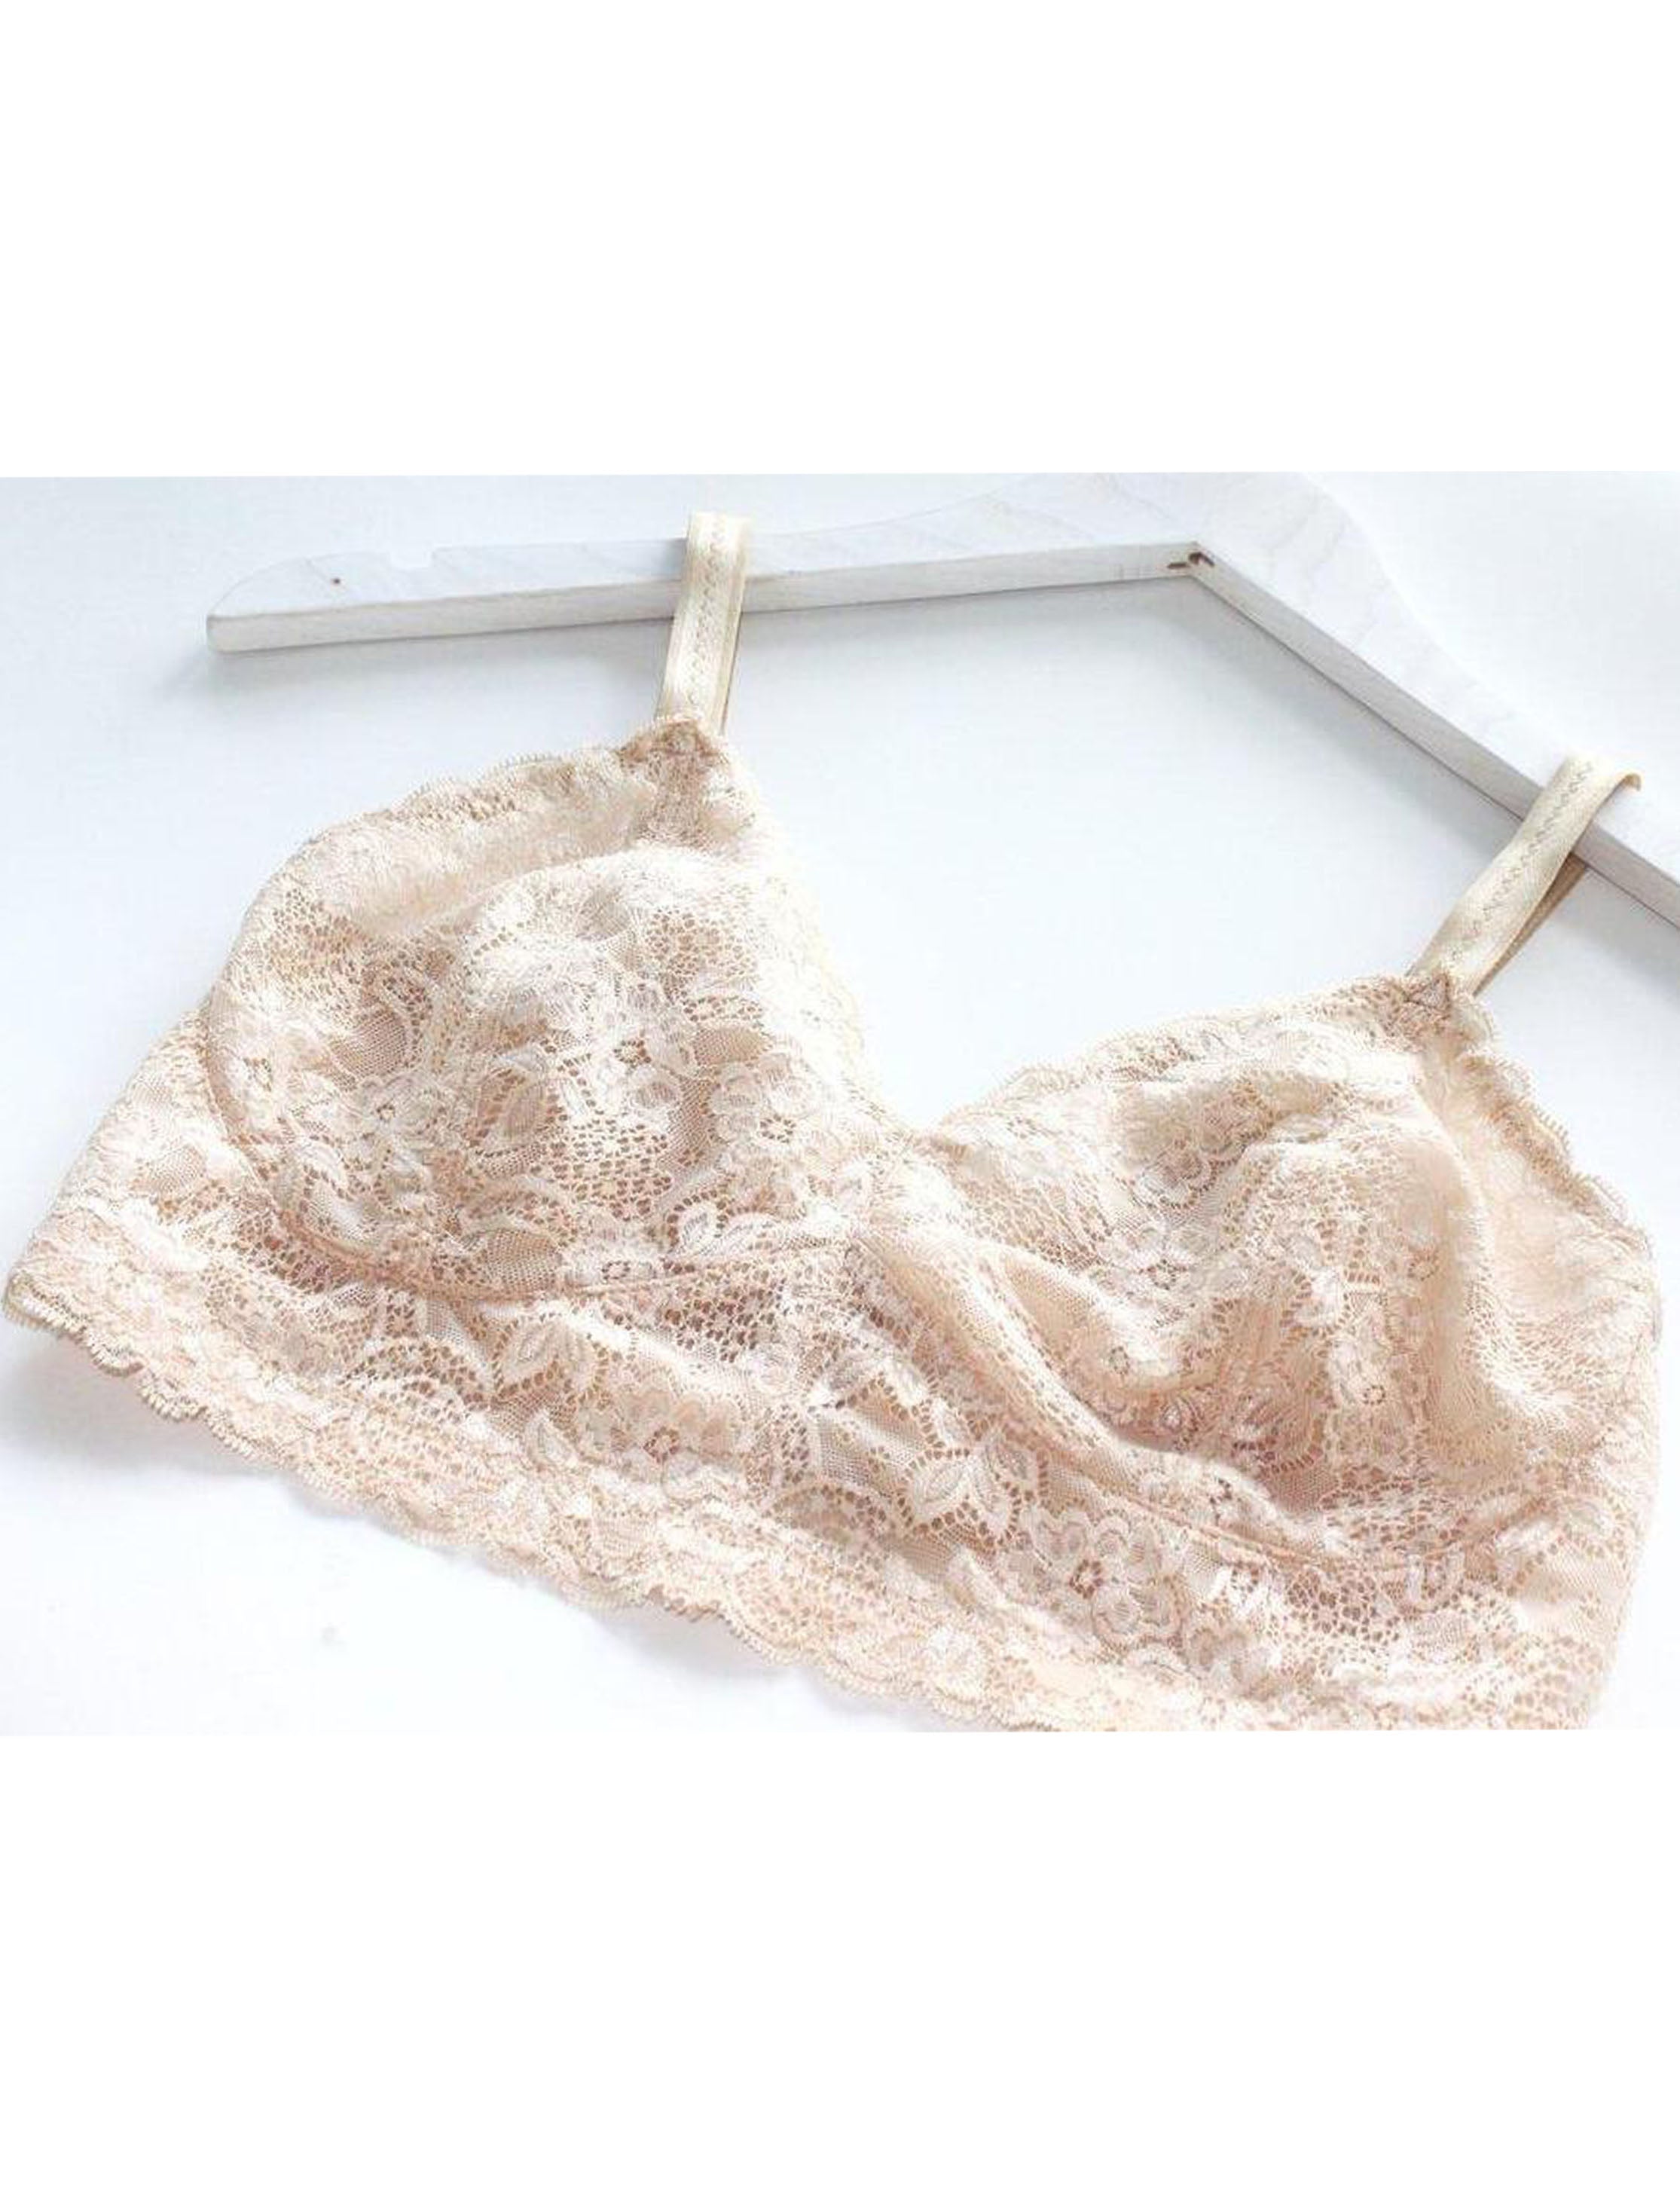 Custom made wireless bra in beige scalloped lace fabric on a hanger, made to order by Rubies Bras.